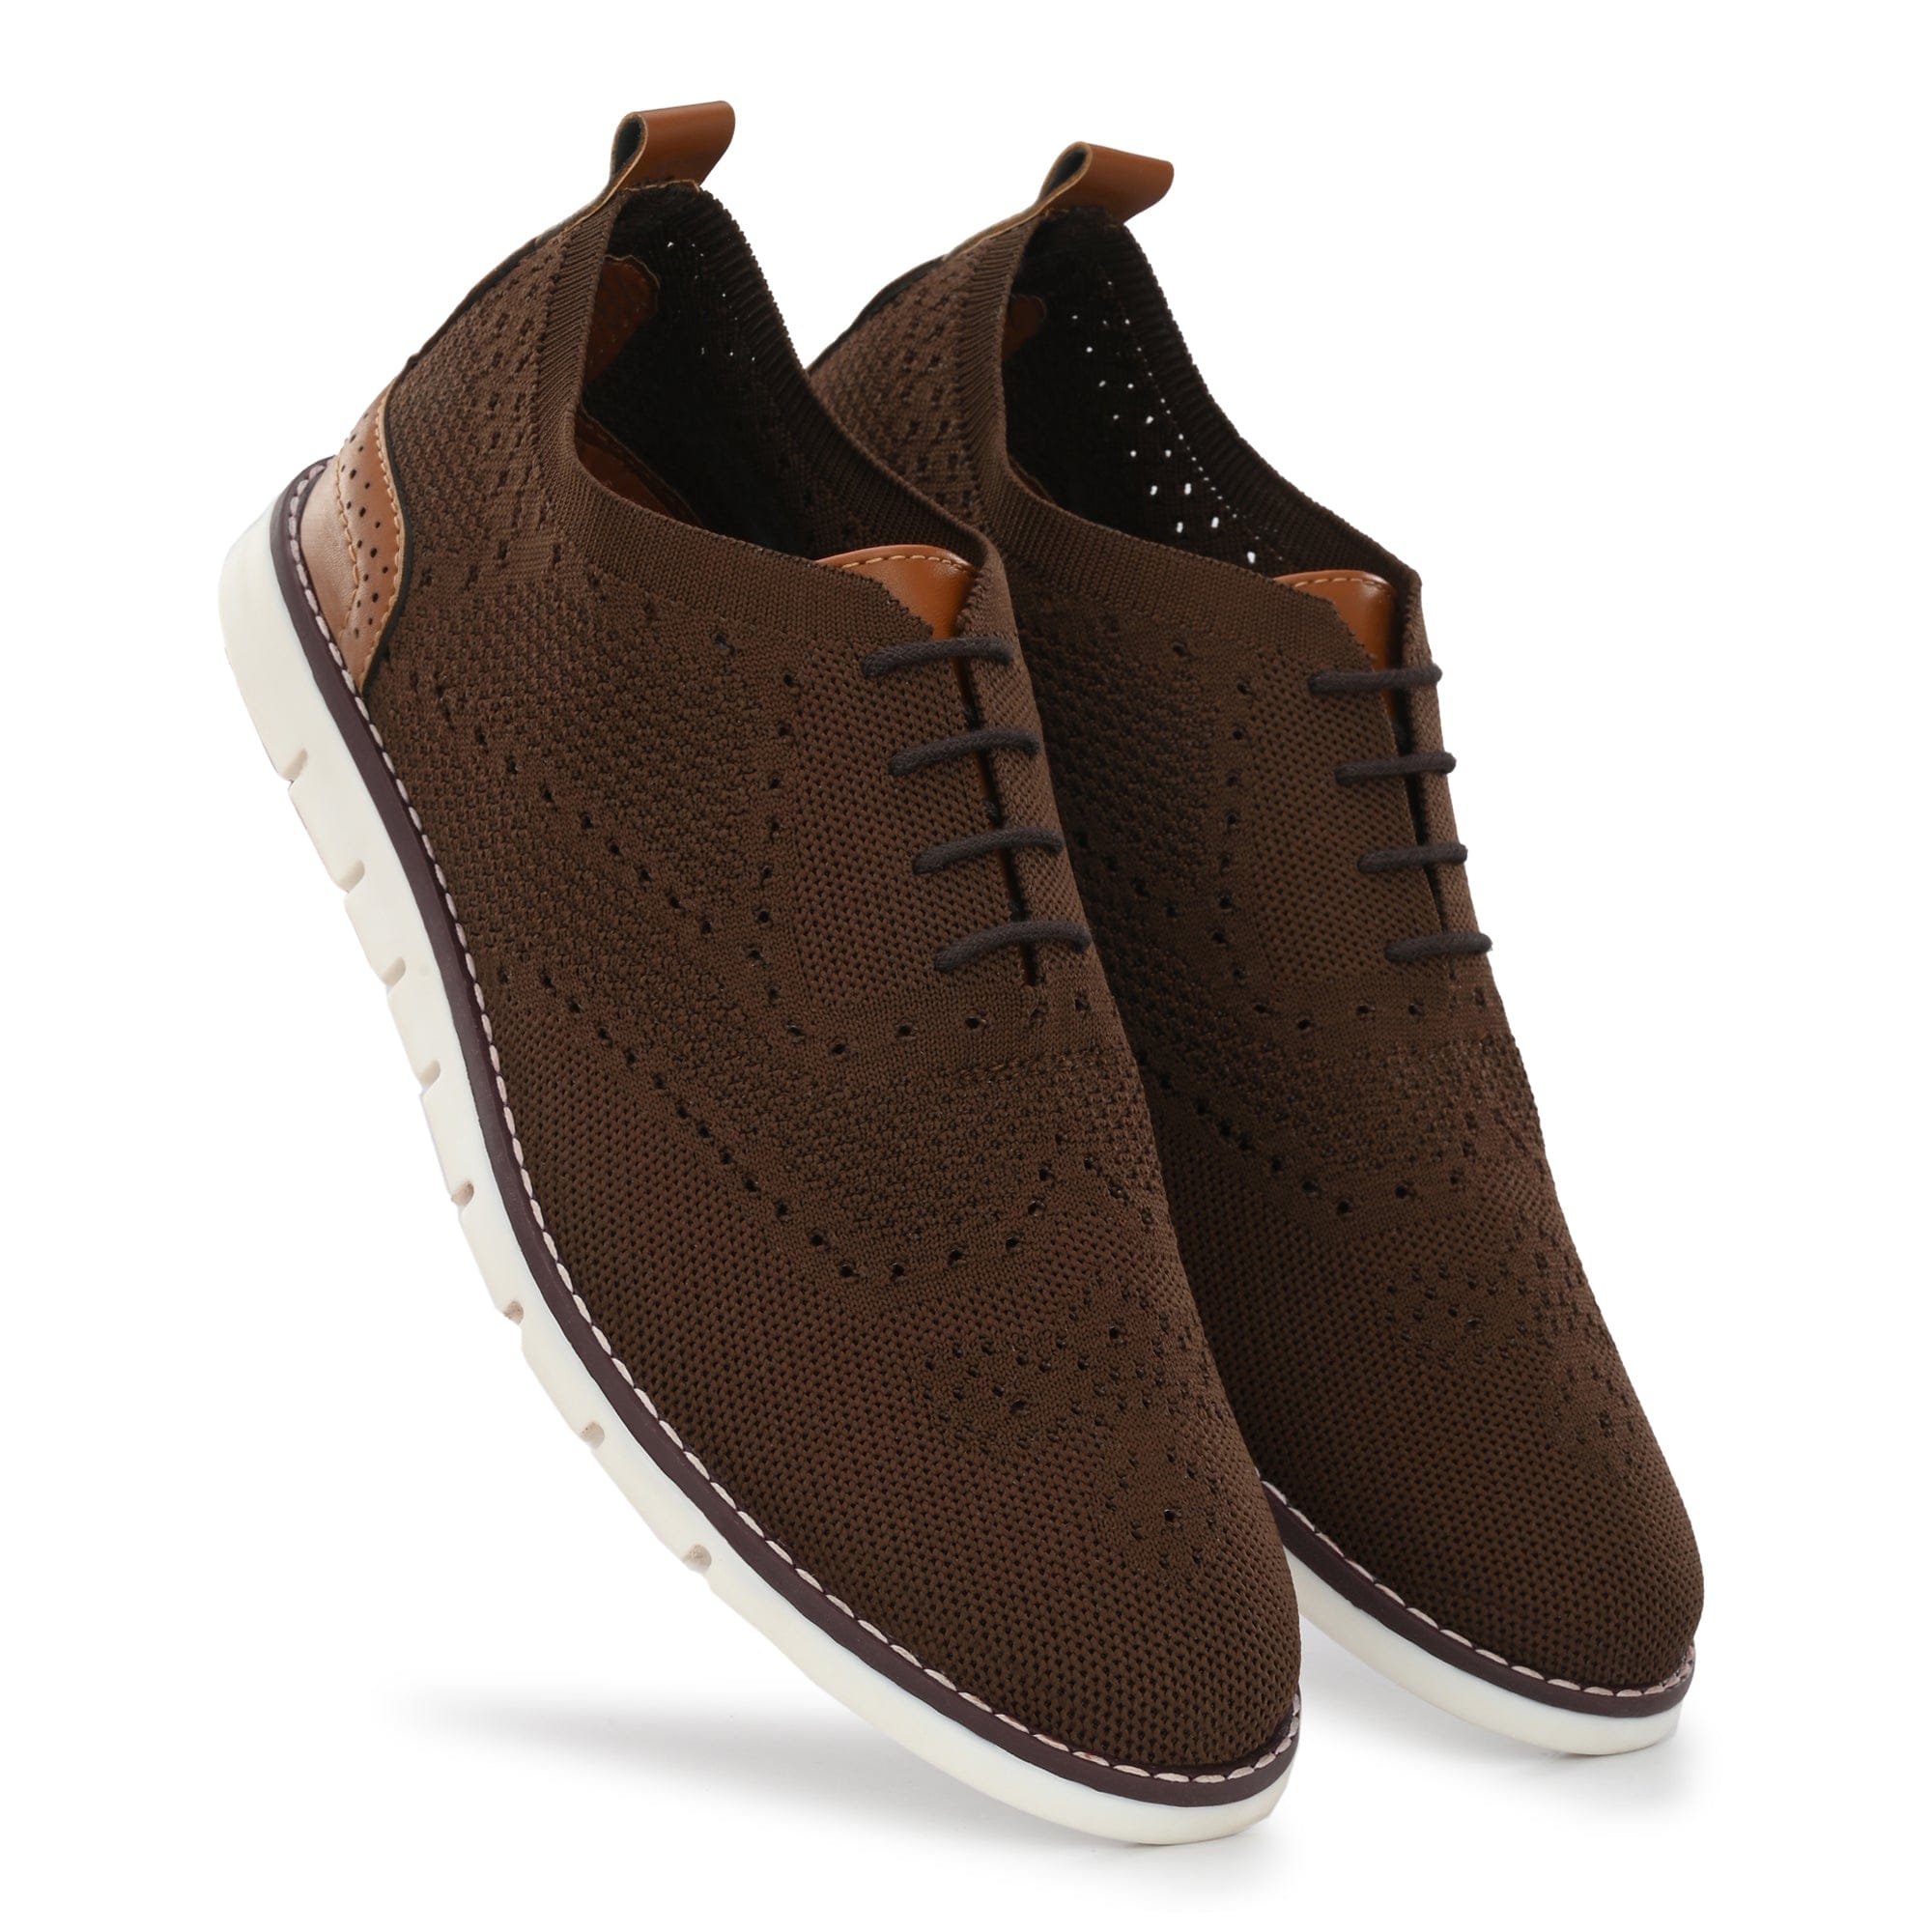 Legwork SWIFTKNIT™ Brown Brogues 100% Recycled Pet Bottles Knit Oxford Dress Shoes